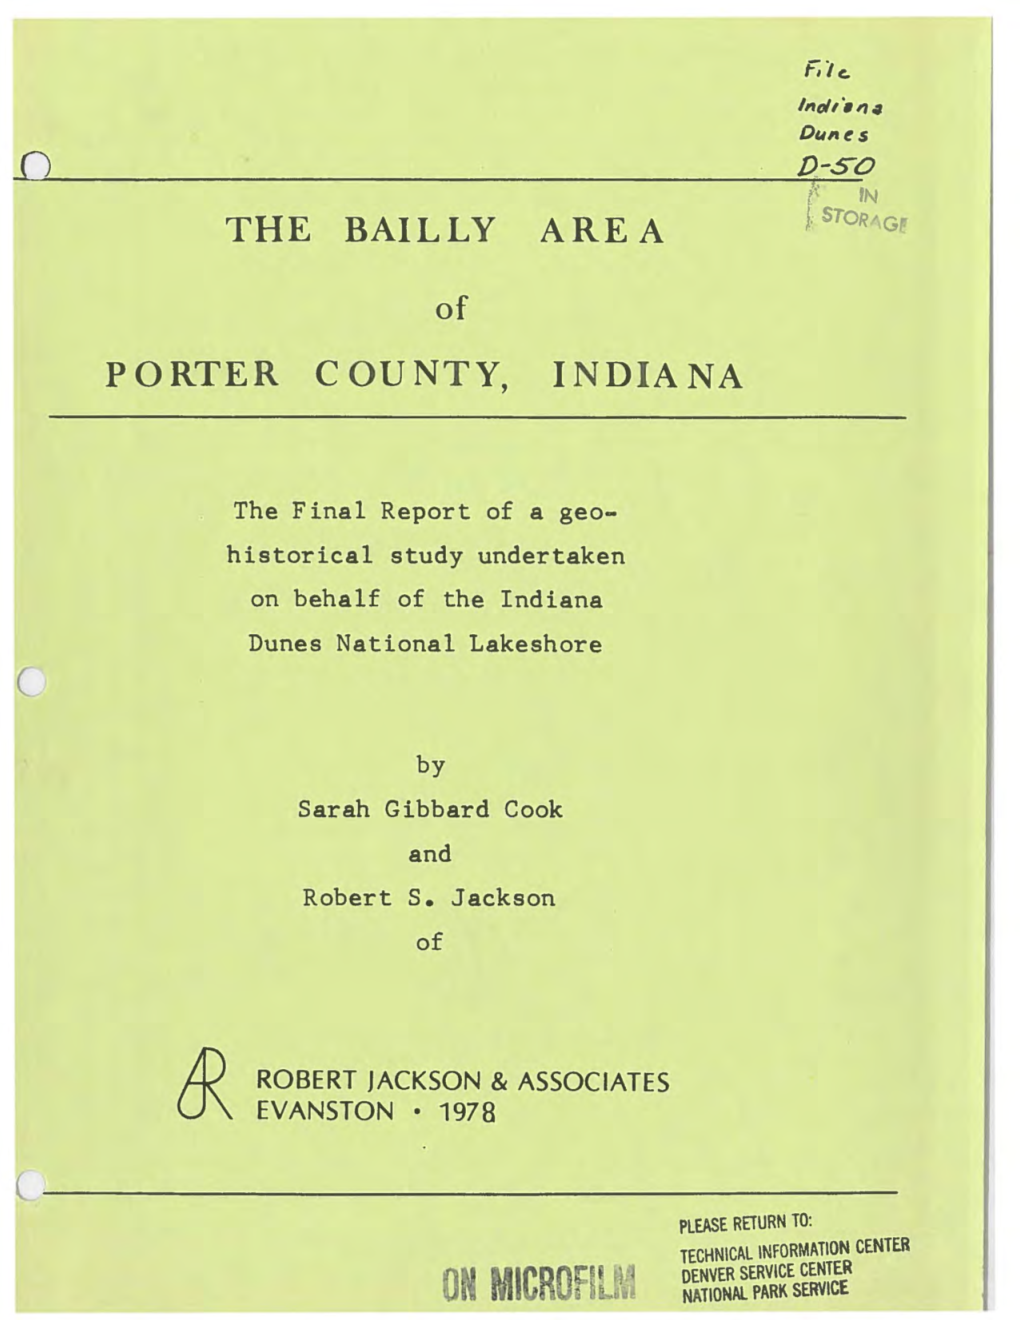 Bailly Area of Porter County, Indiana, Undertaken on Behalf of the Management of the Indiana Dunes National Lakeshore